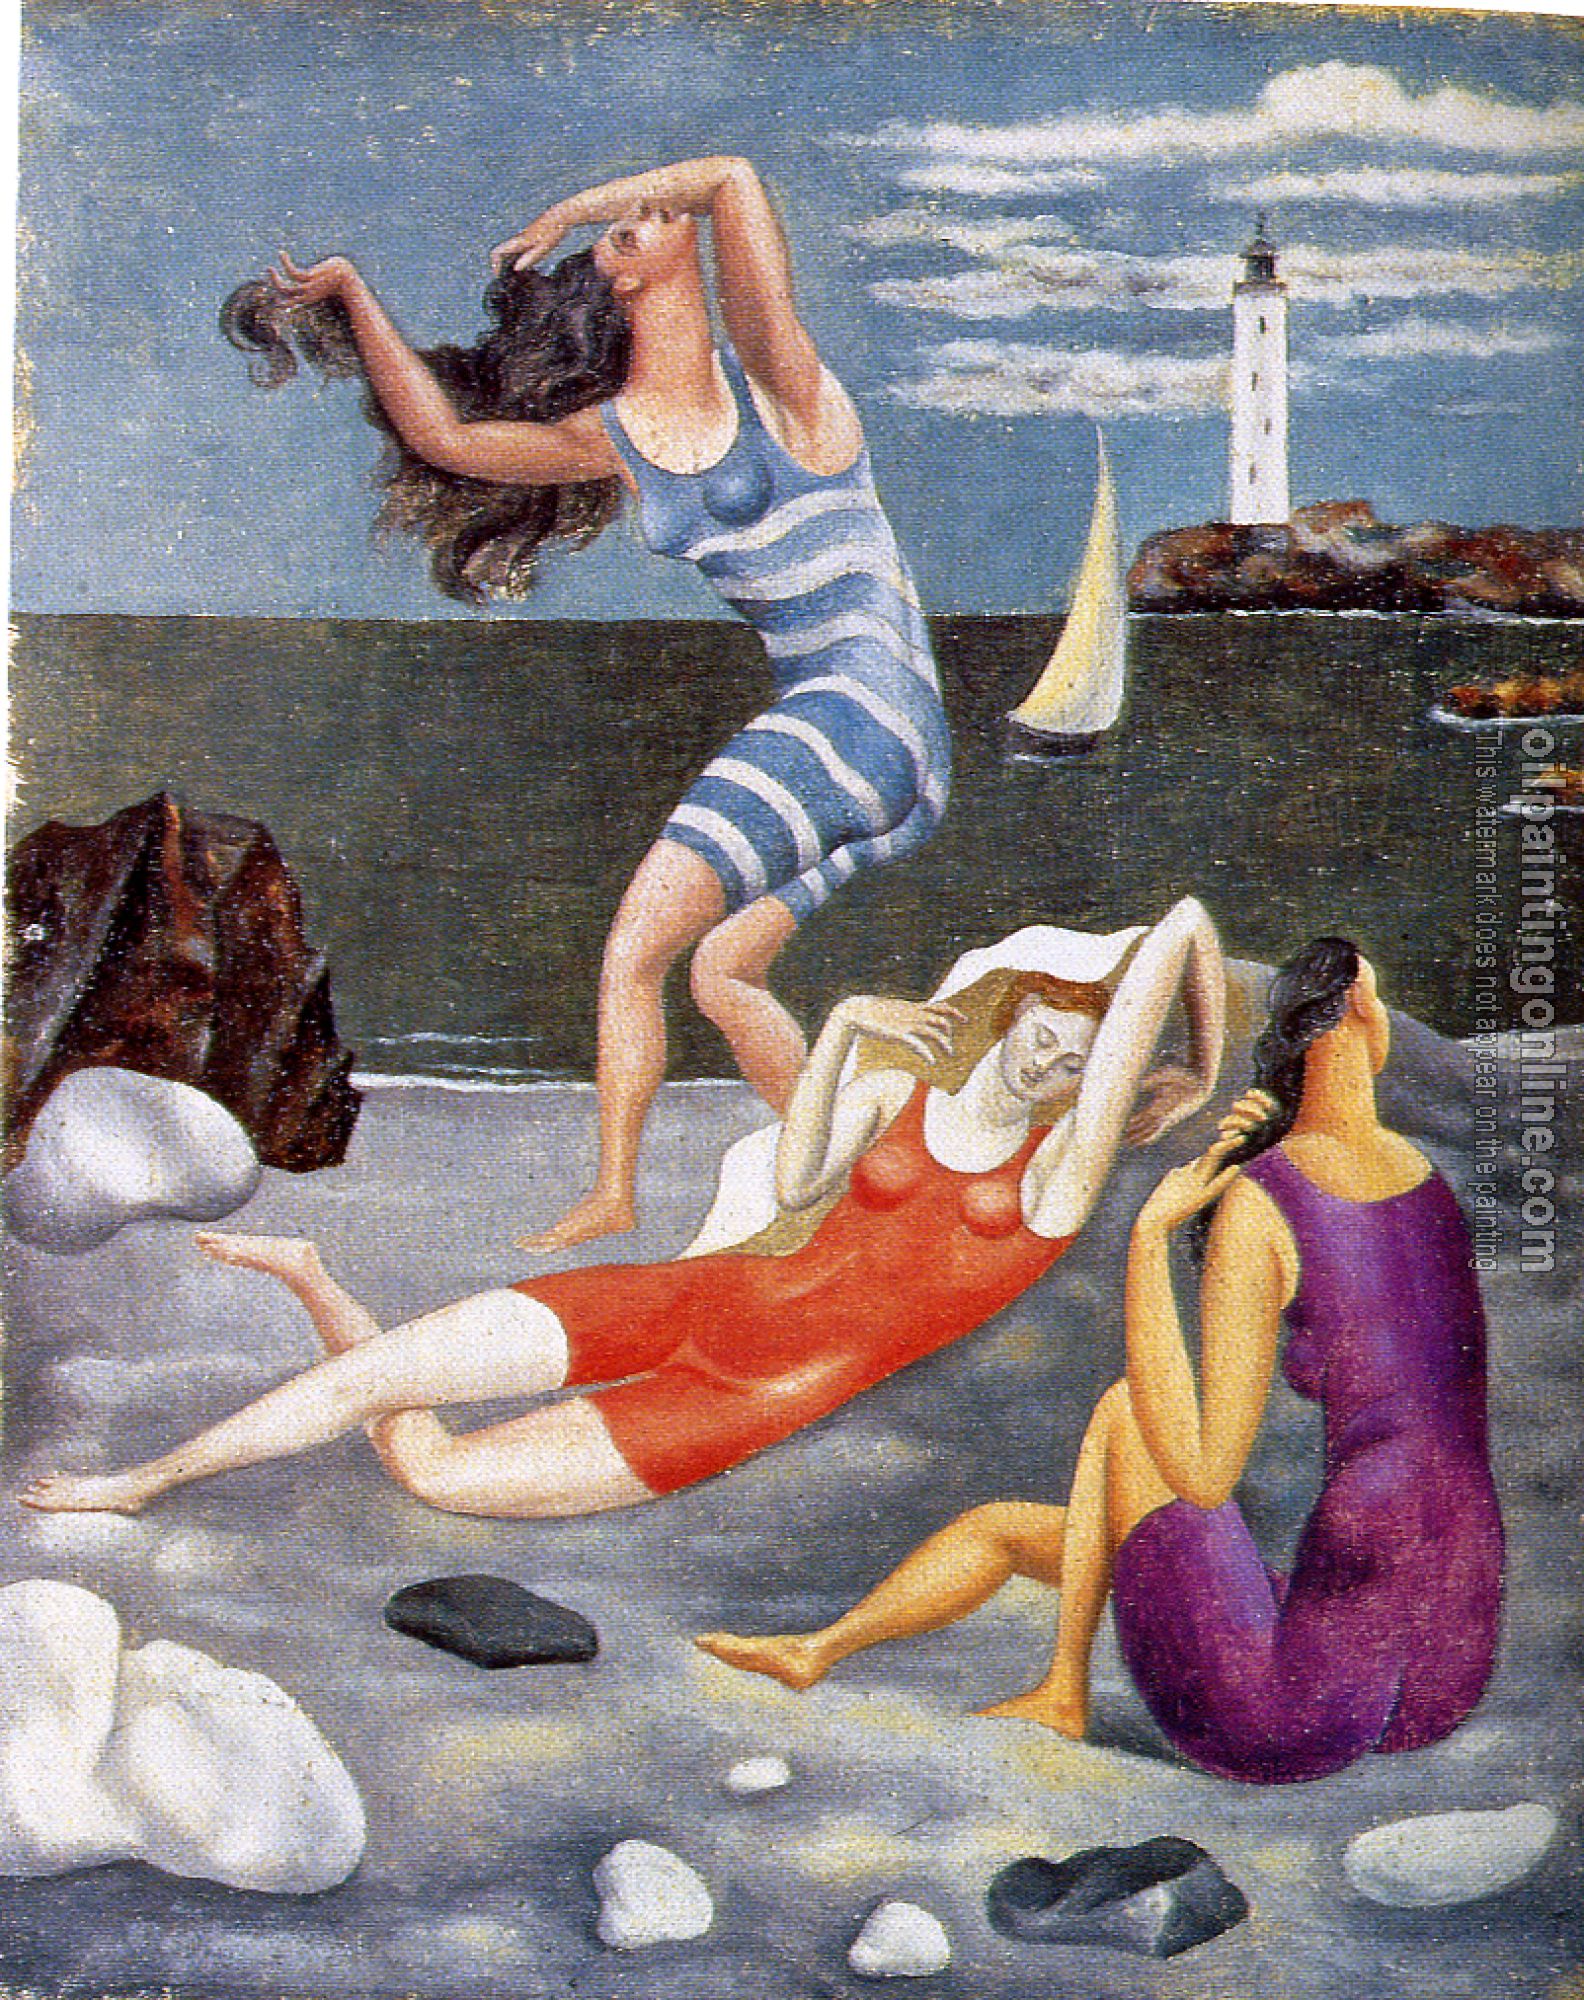 Picasso, Pablo - The bathers